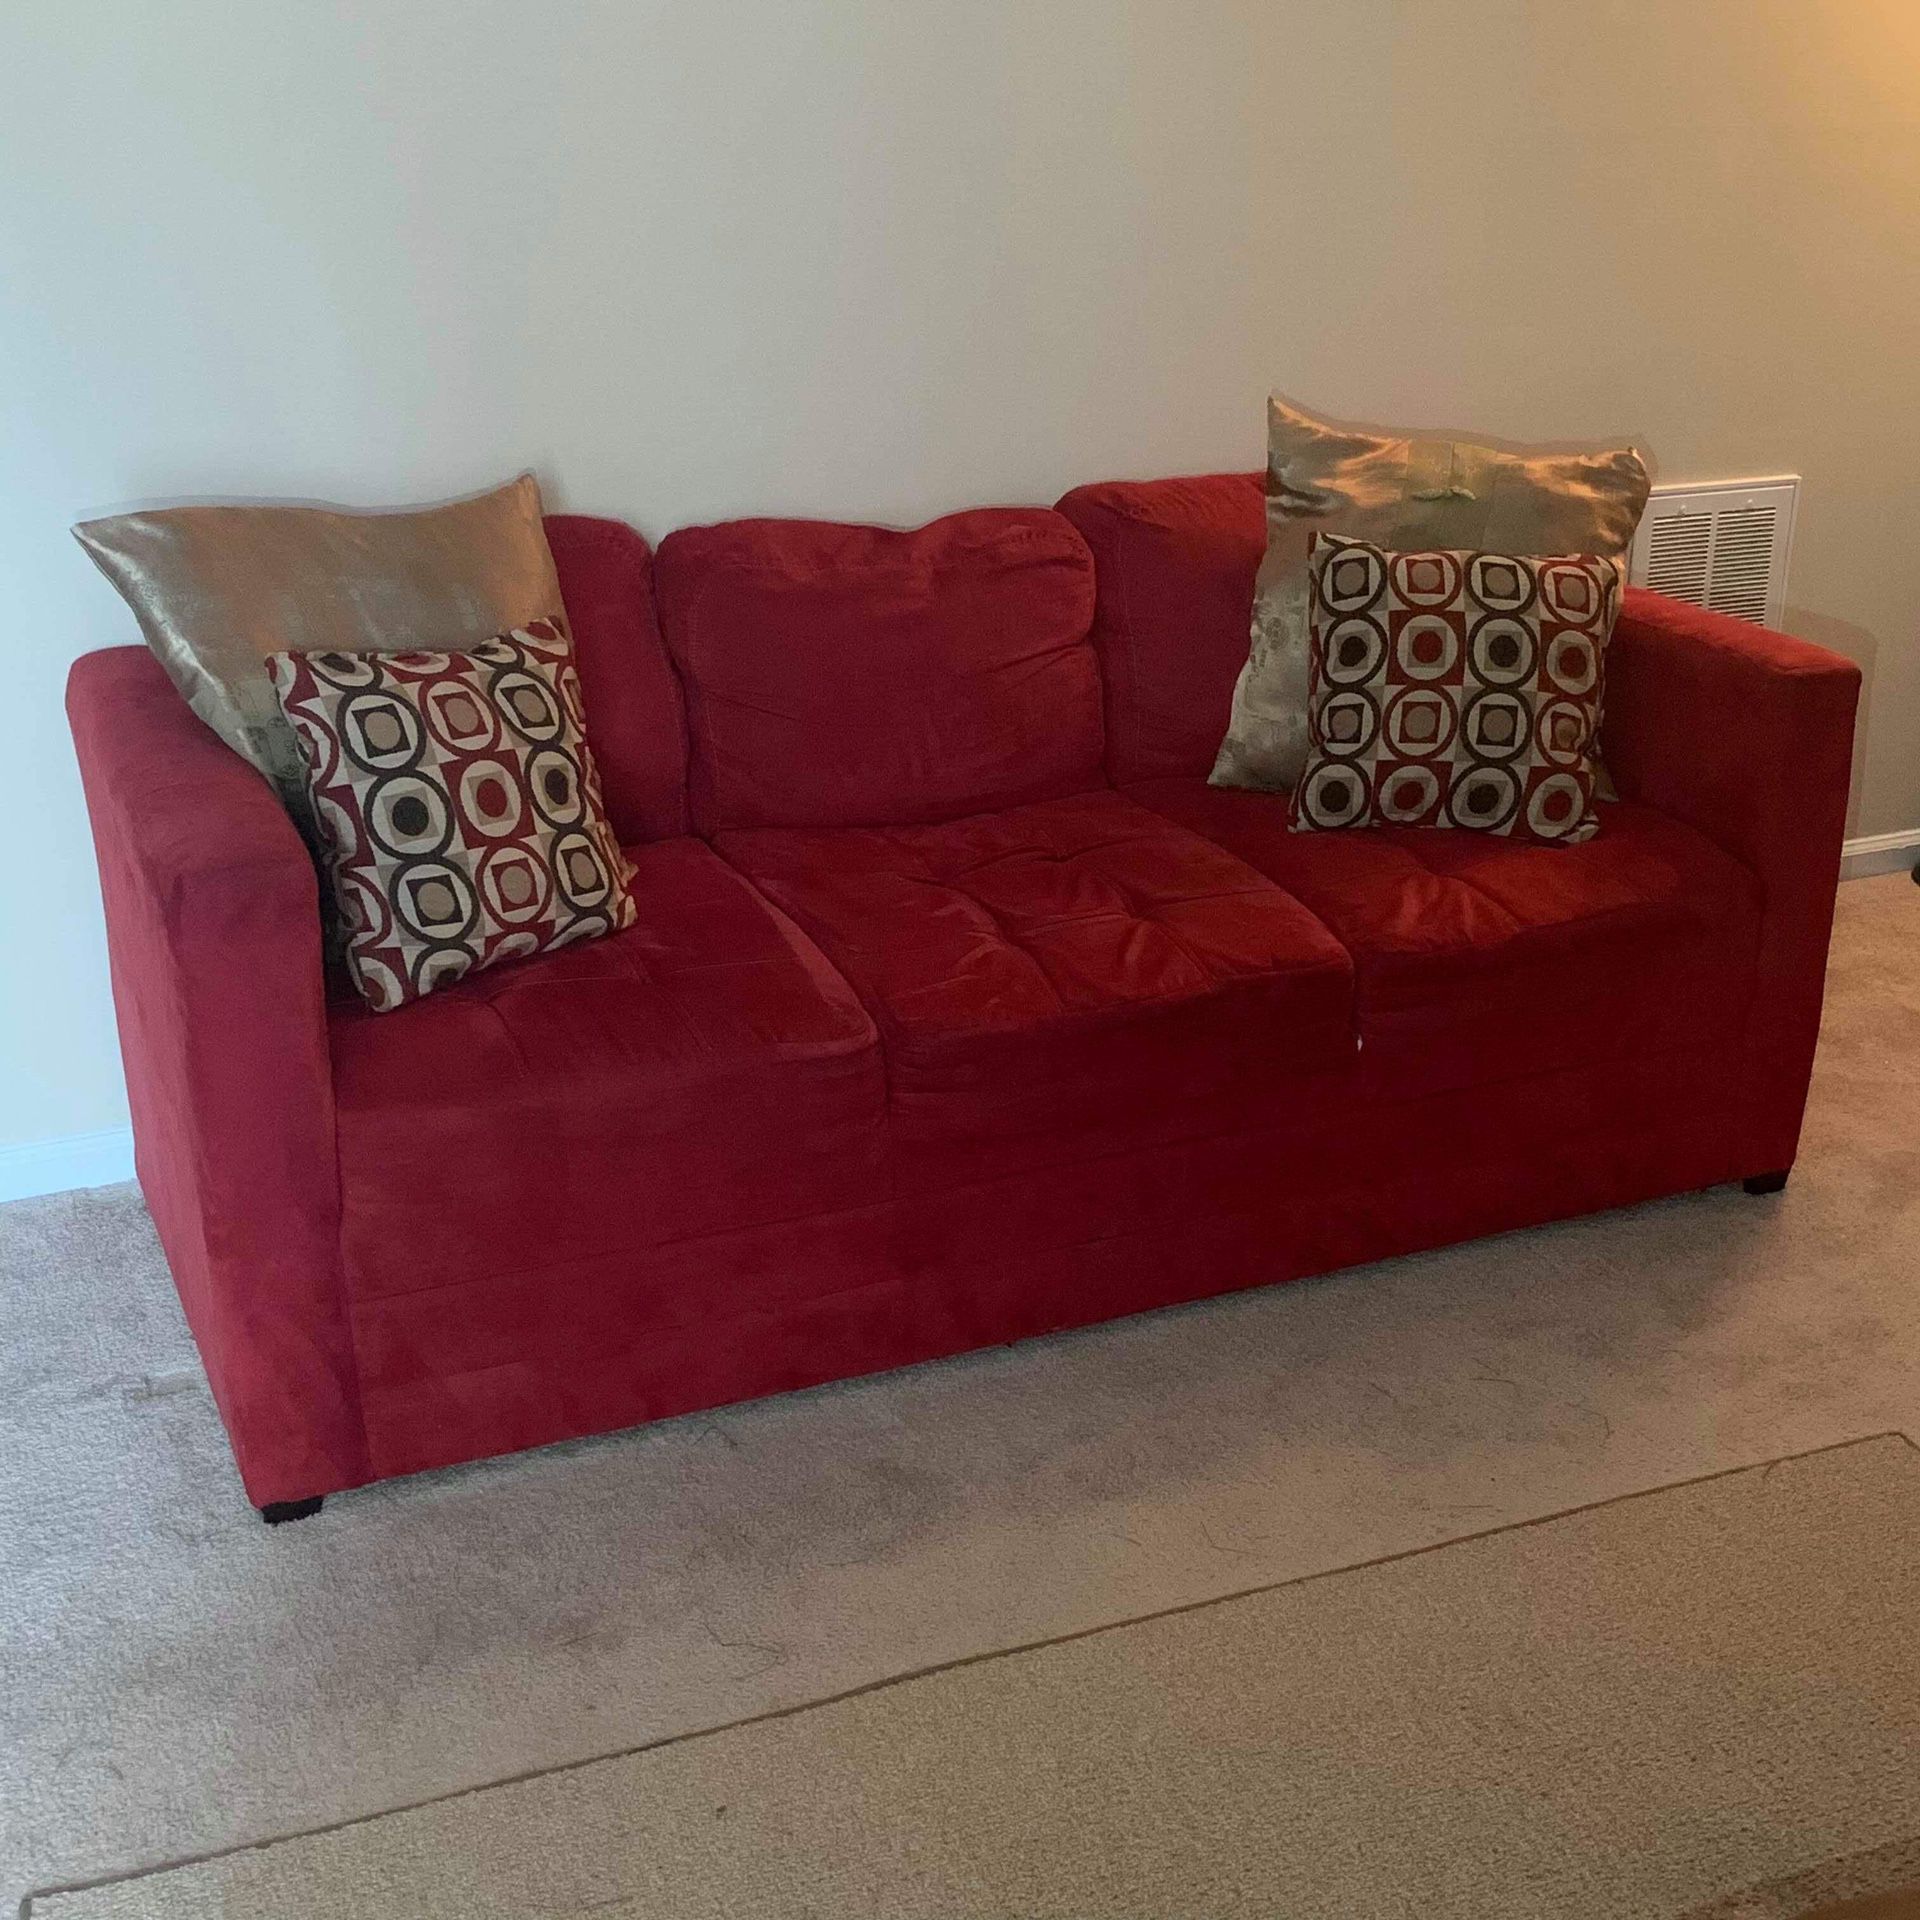 Furniture 3 Piece Set, 2 Red Couches & Coffee Table | READ F.A.Q